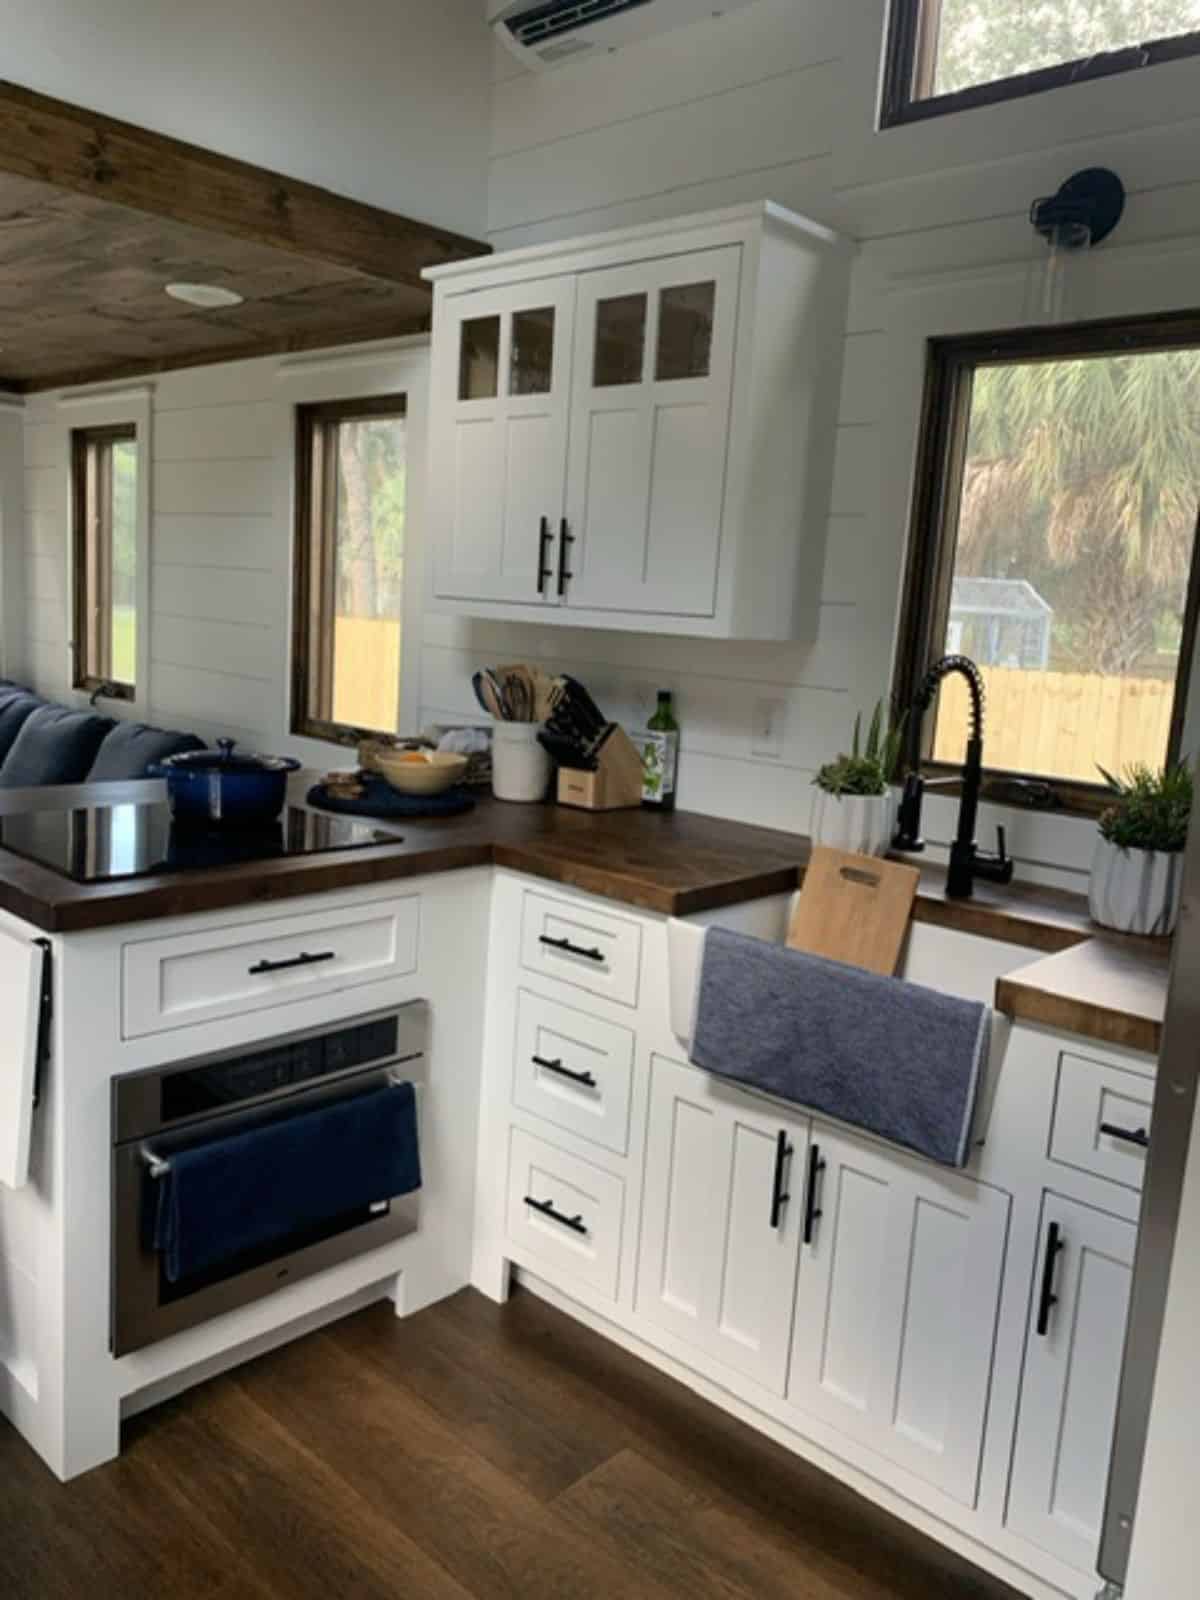 L shaped kitchen countertop in kitchen area of gooseneck tiny home